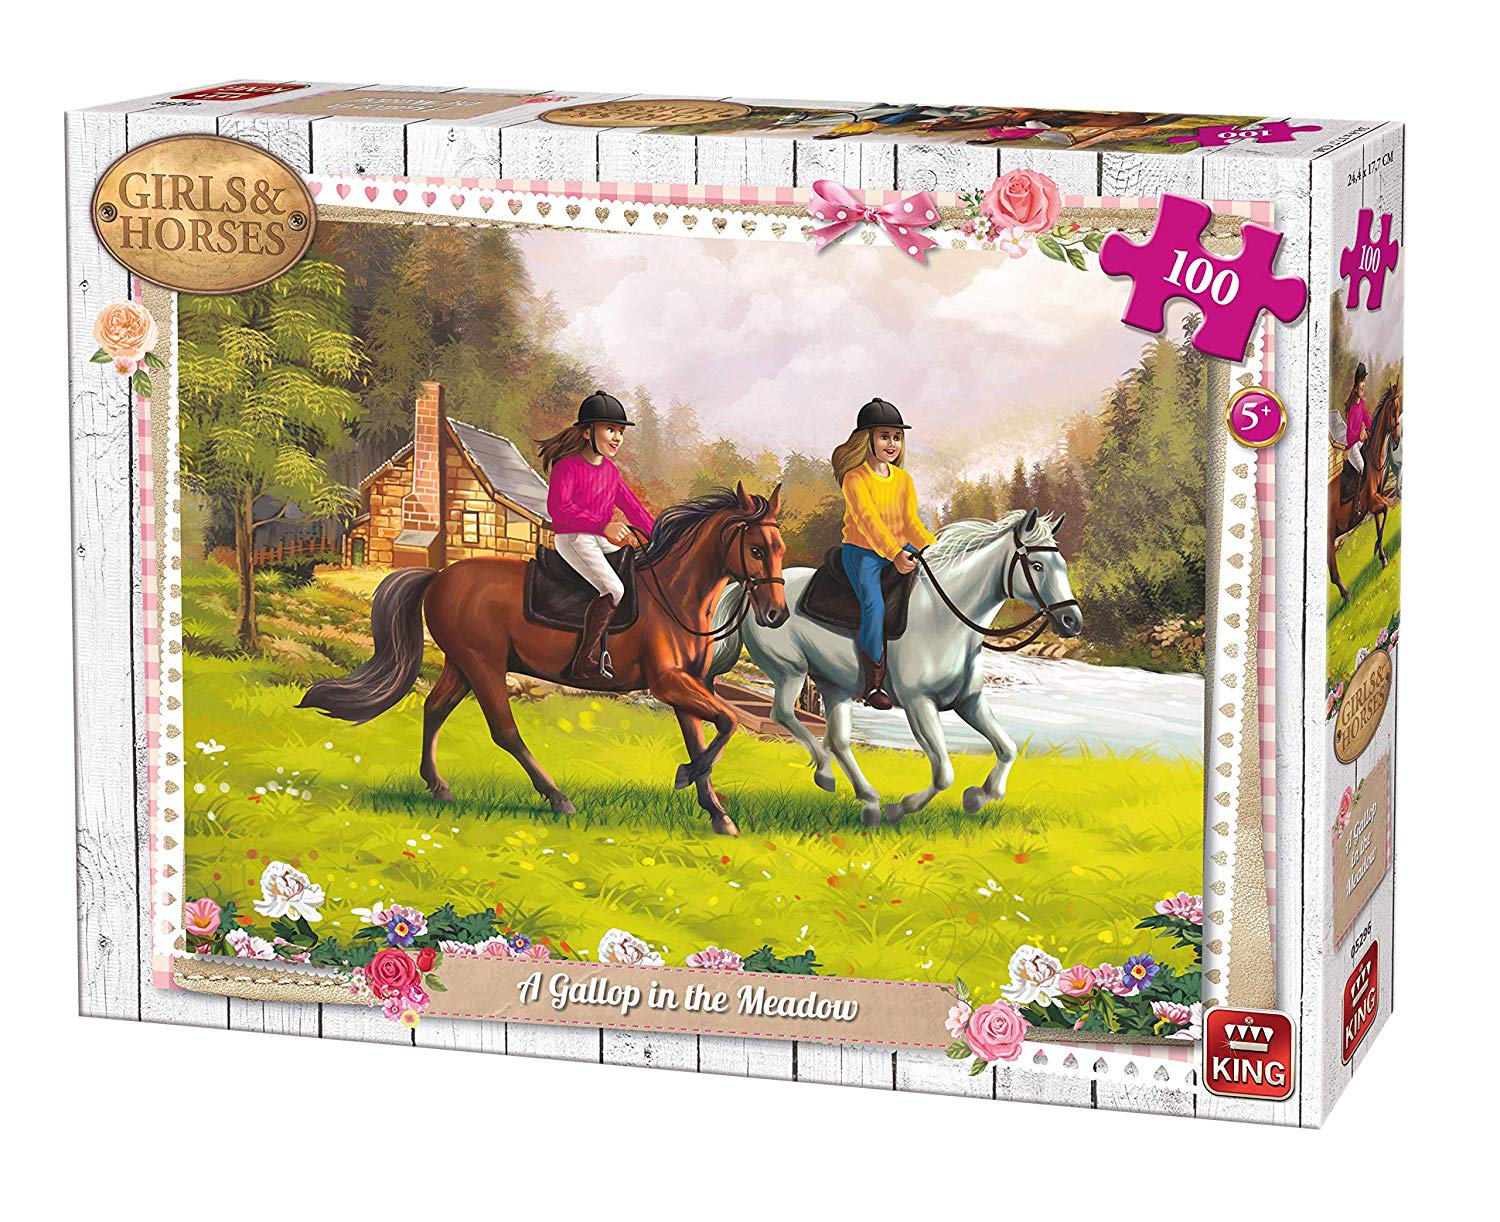 King Kng05296 Girl And Horse Galloping In The Meadow Puzzle 100